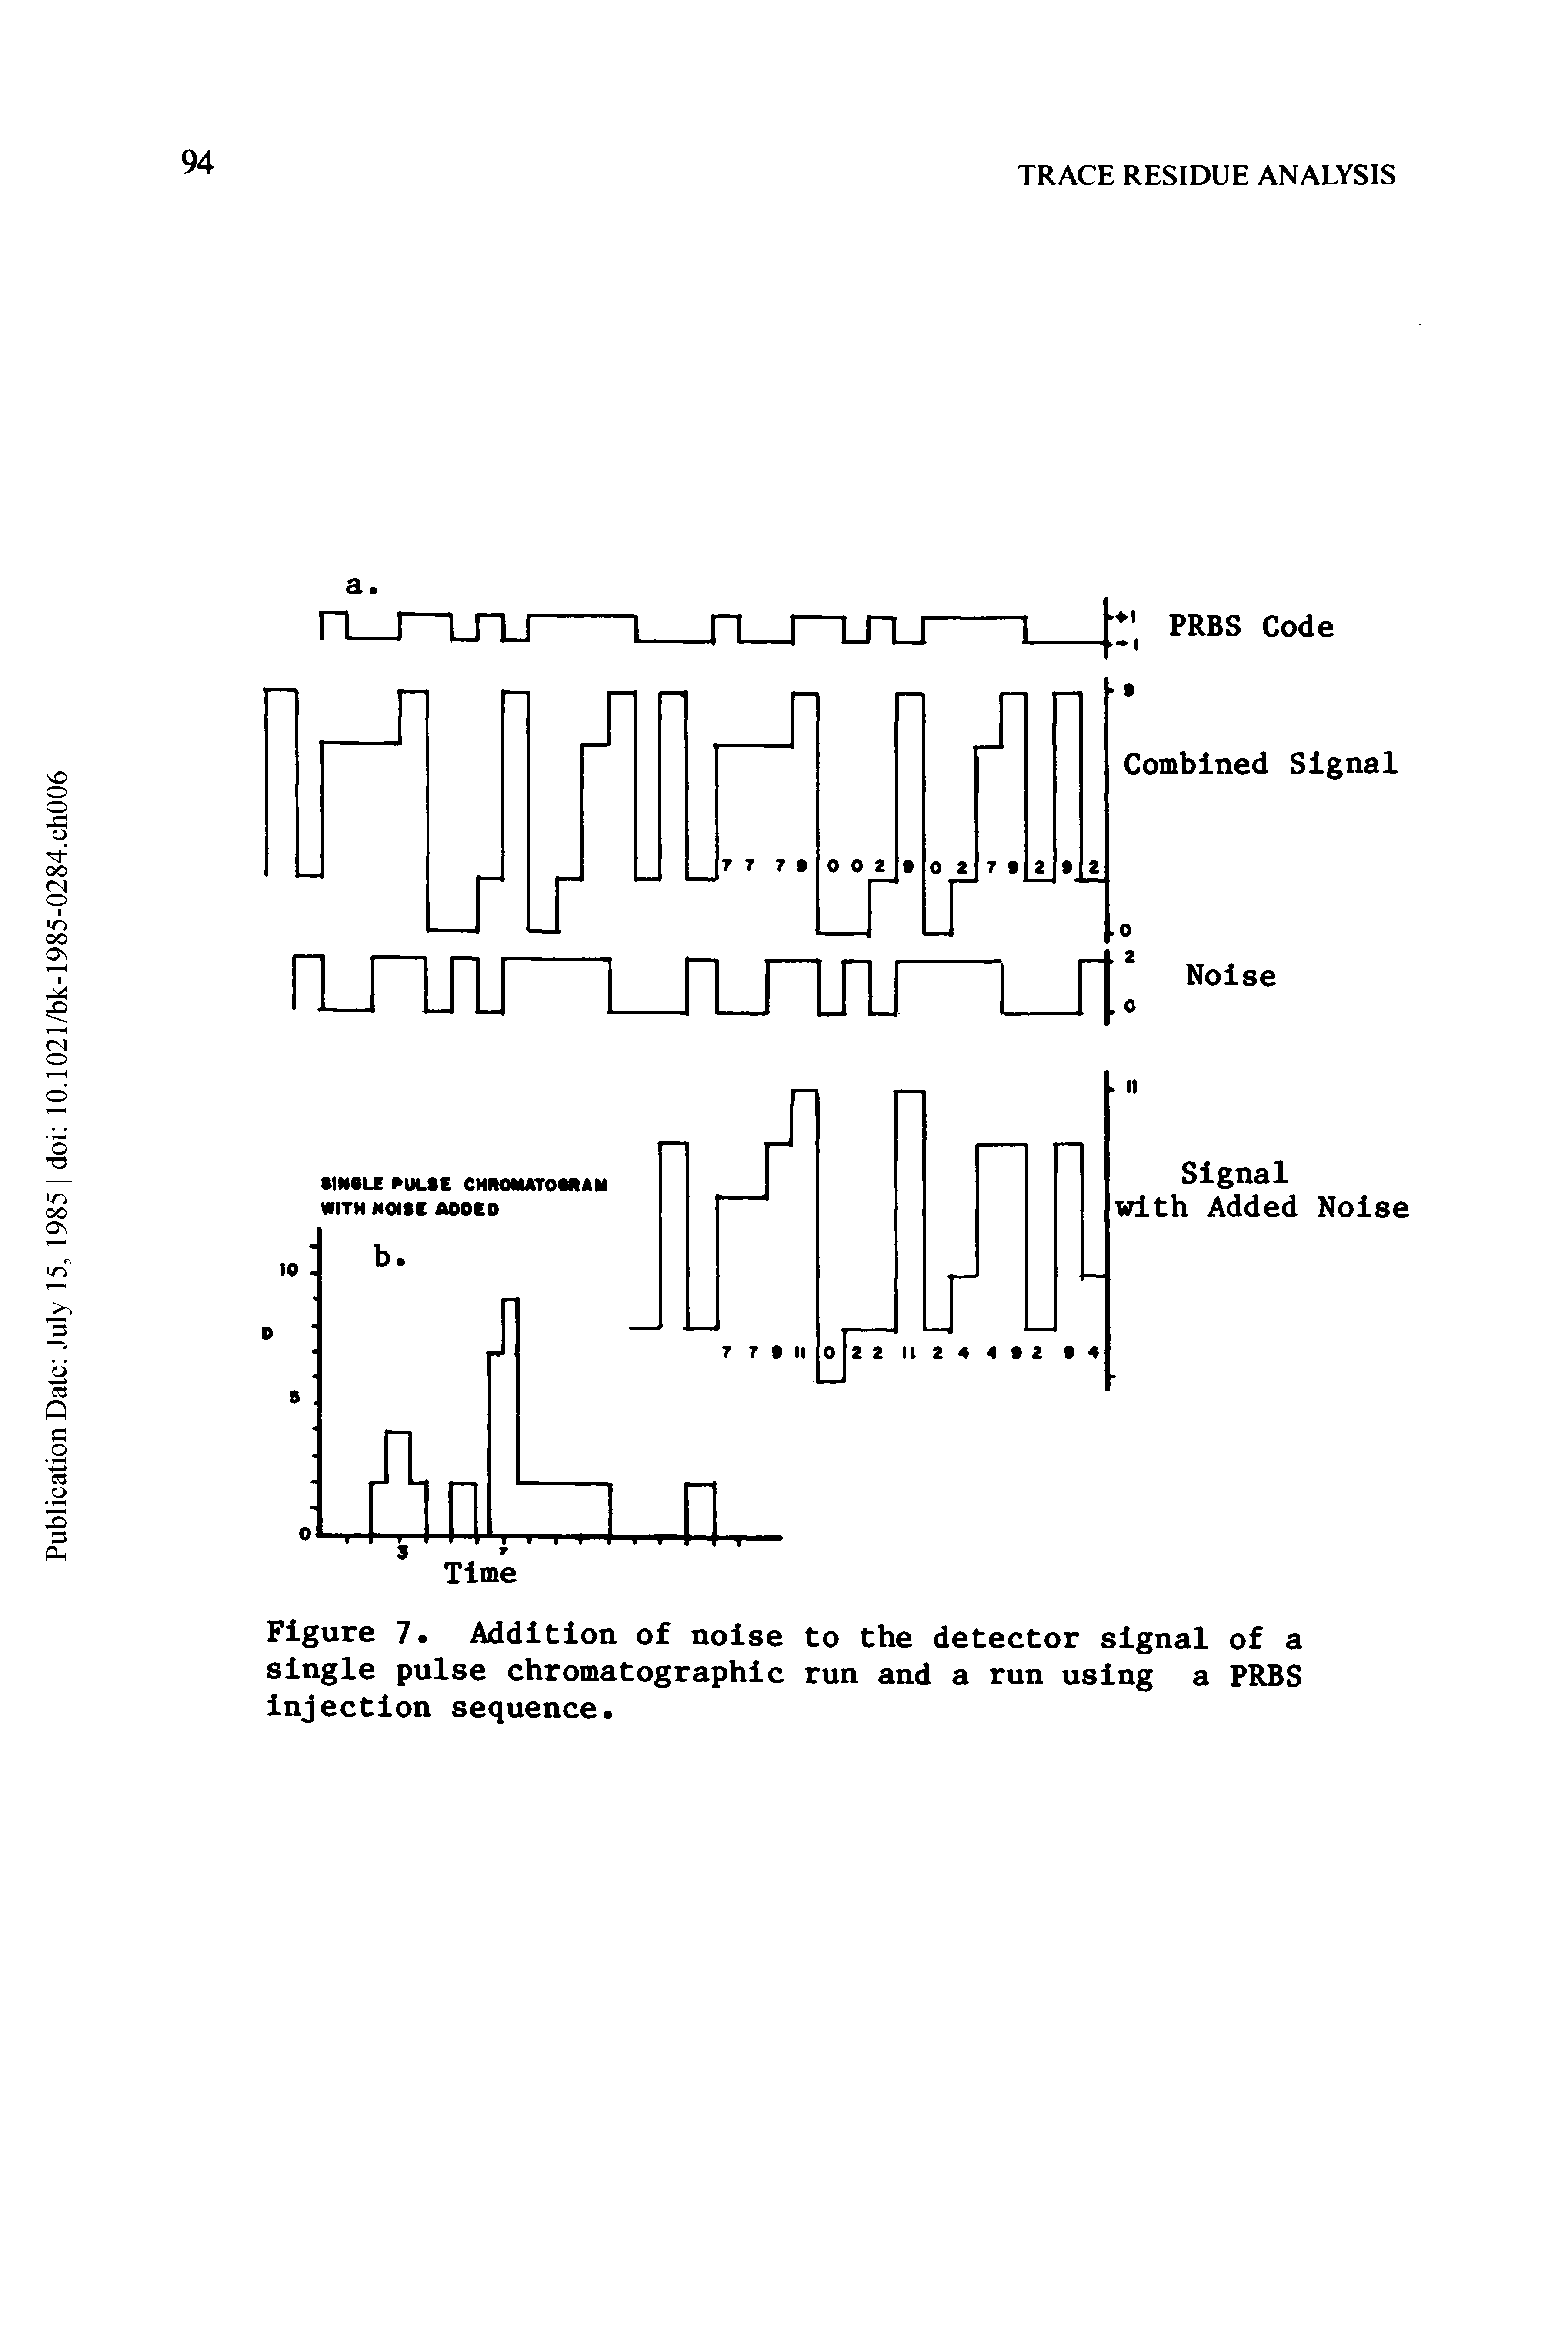 Figure 7 Addition of noise to the detector signal of a single pulse chromatographic run and a run using a PRBS injection sequence.